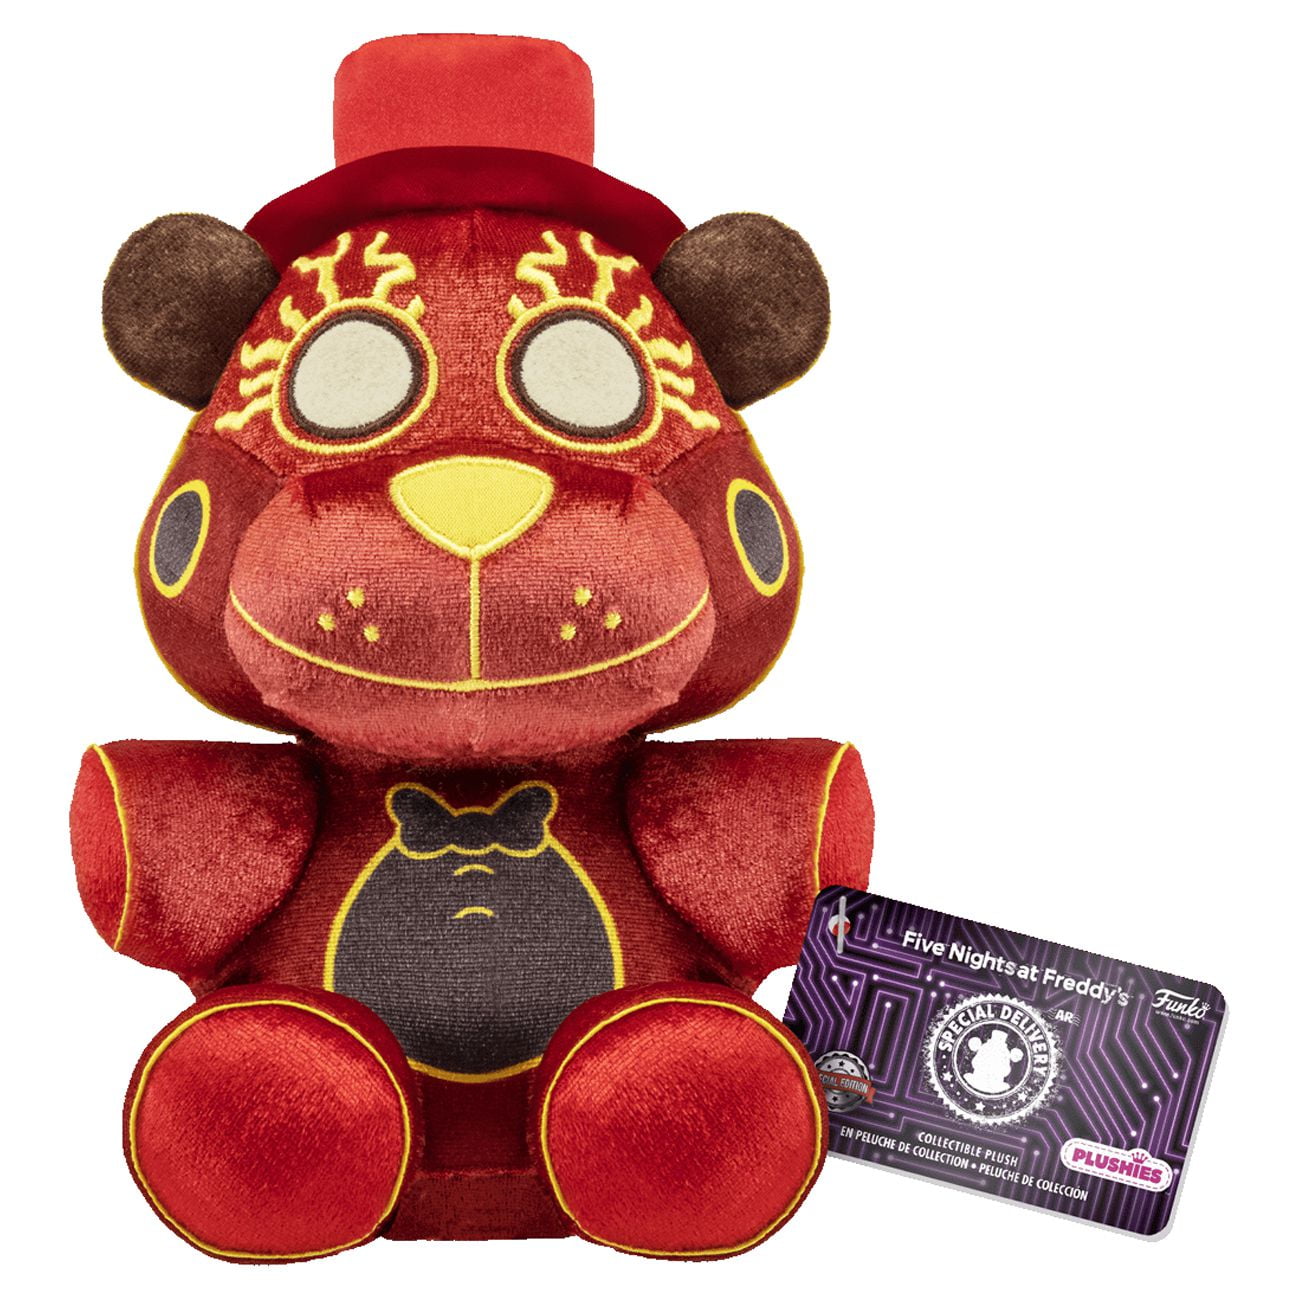 Cute and Safe golden freddy, Perfect for Gifting 